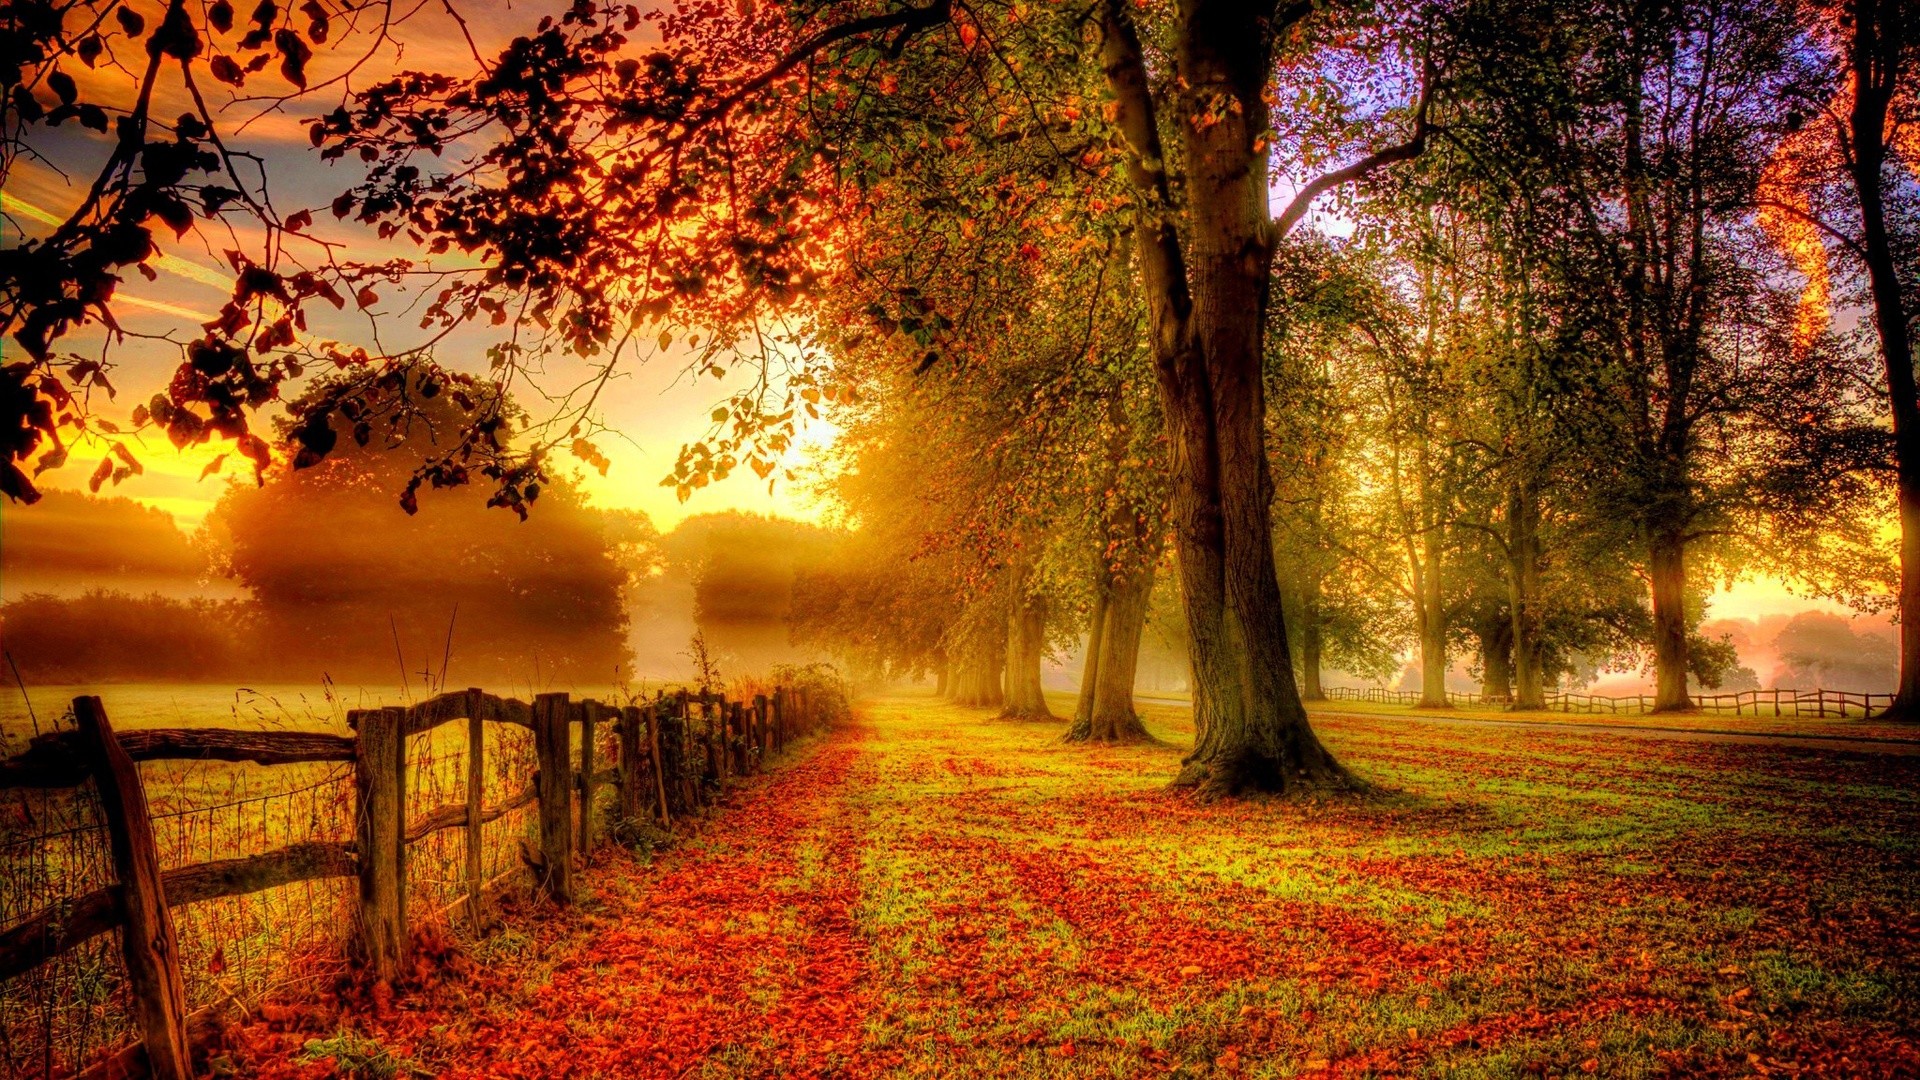 1920x1080 autumn scenery red leaves road fence Wallpaper, Desktop Wallpapers .